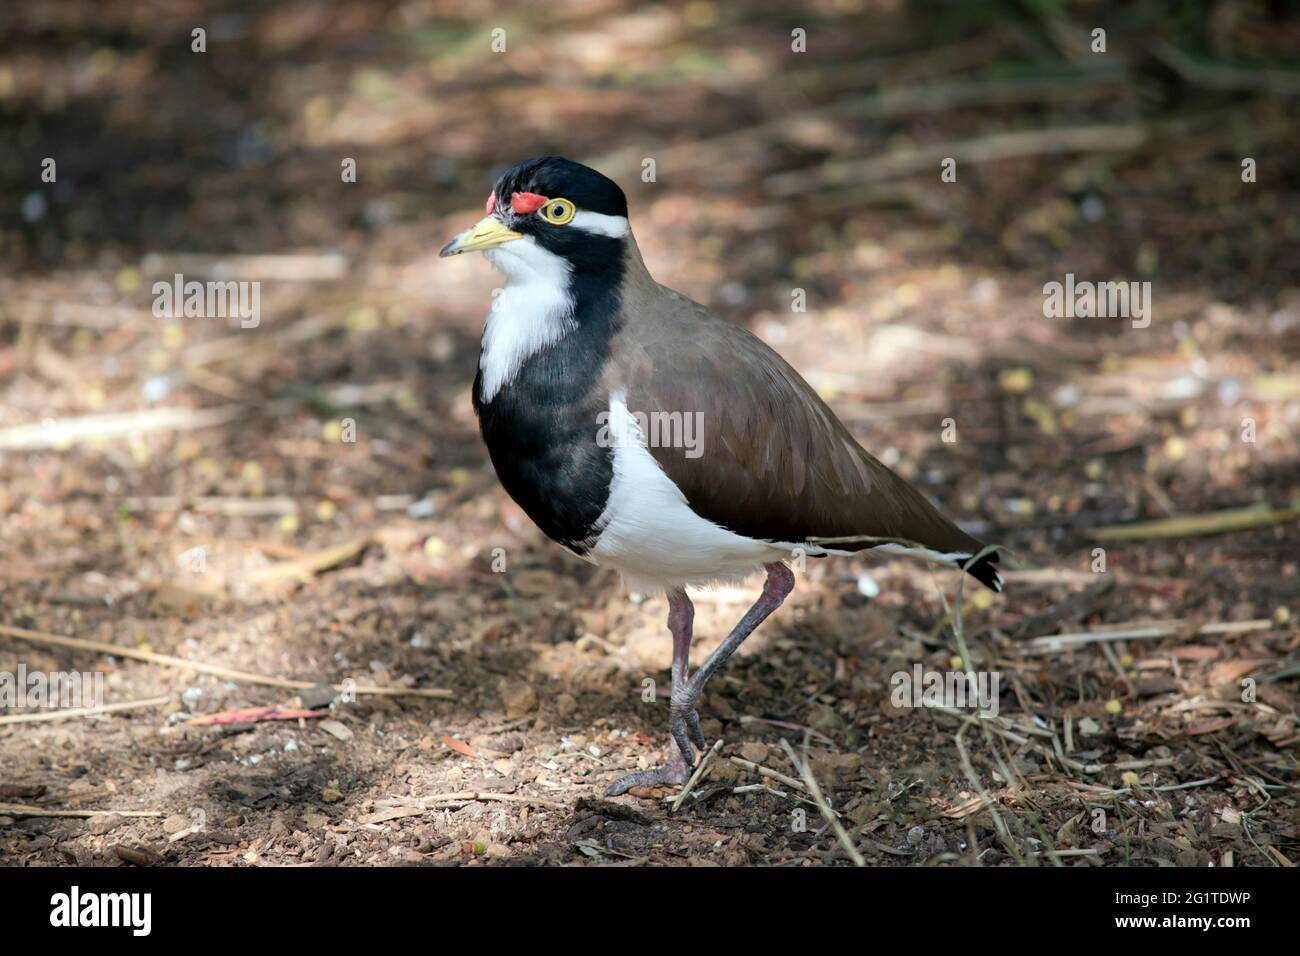 the banded lapwing has red lore wattle and a yellow bill, with yellow eyes and eye rings. It has brown wings and a black face with white on its chest Stock Photo